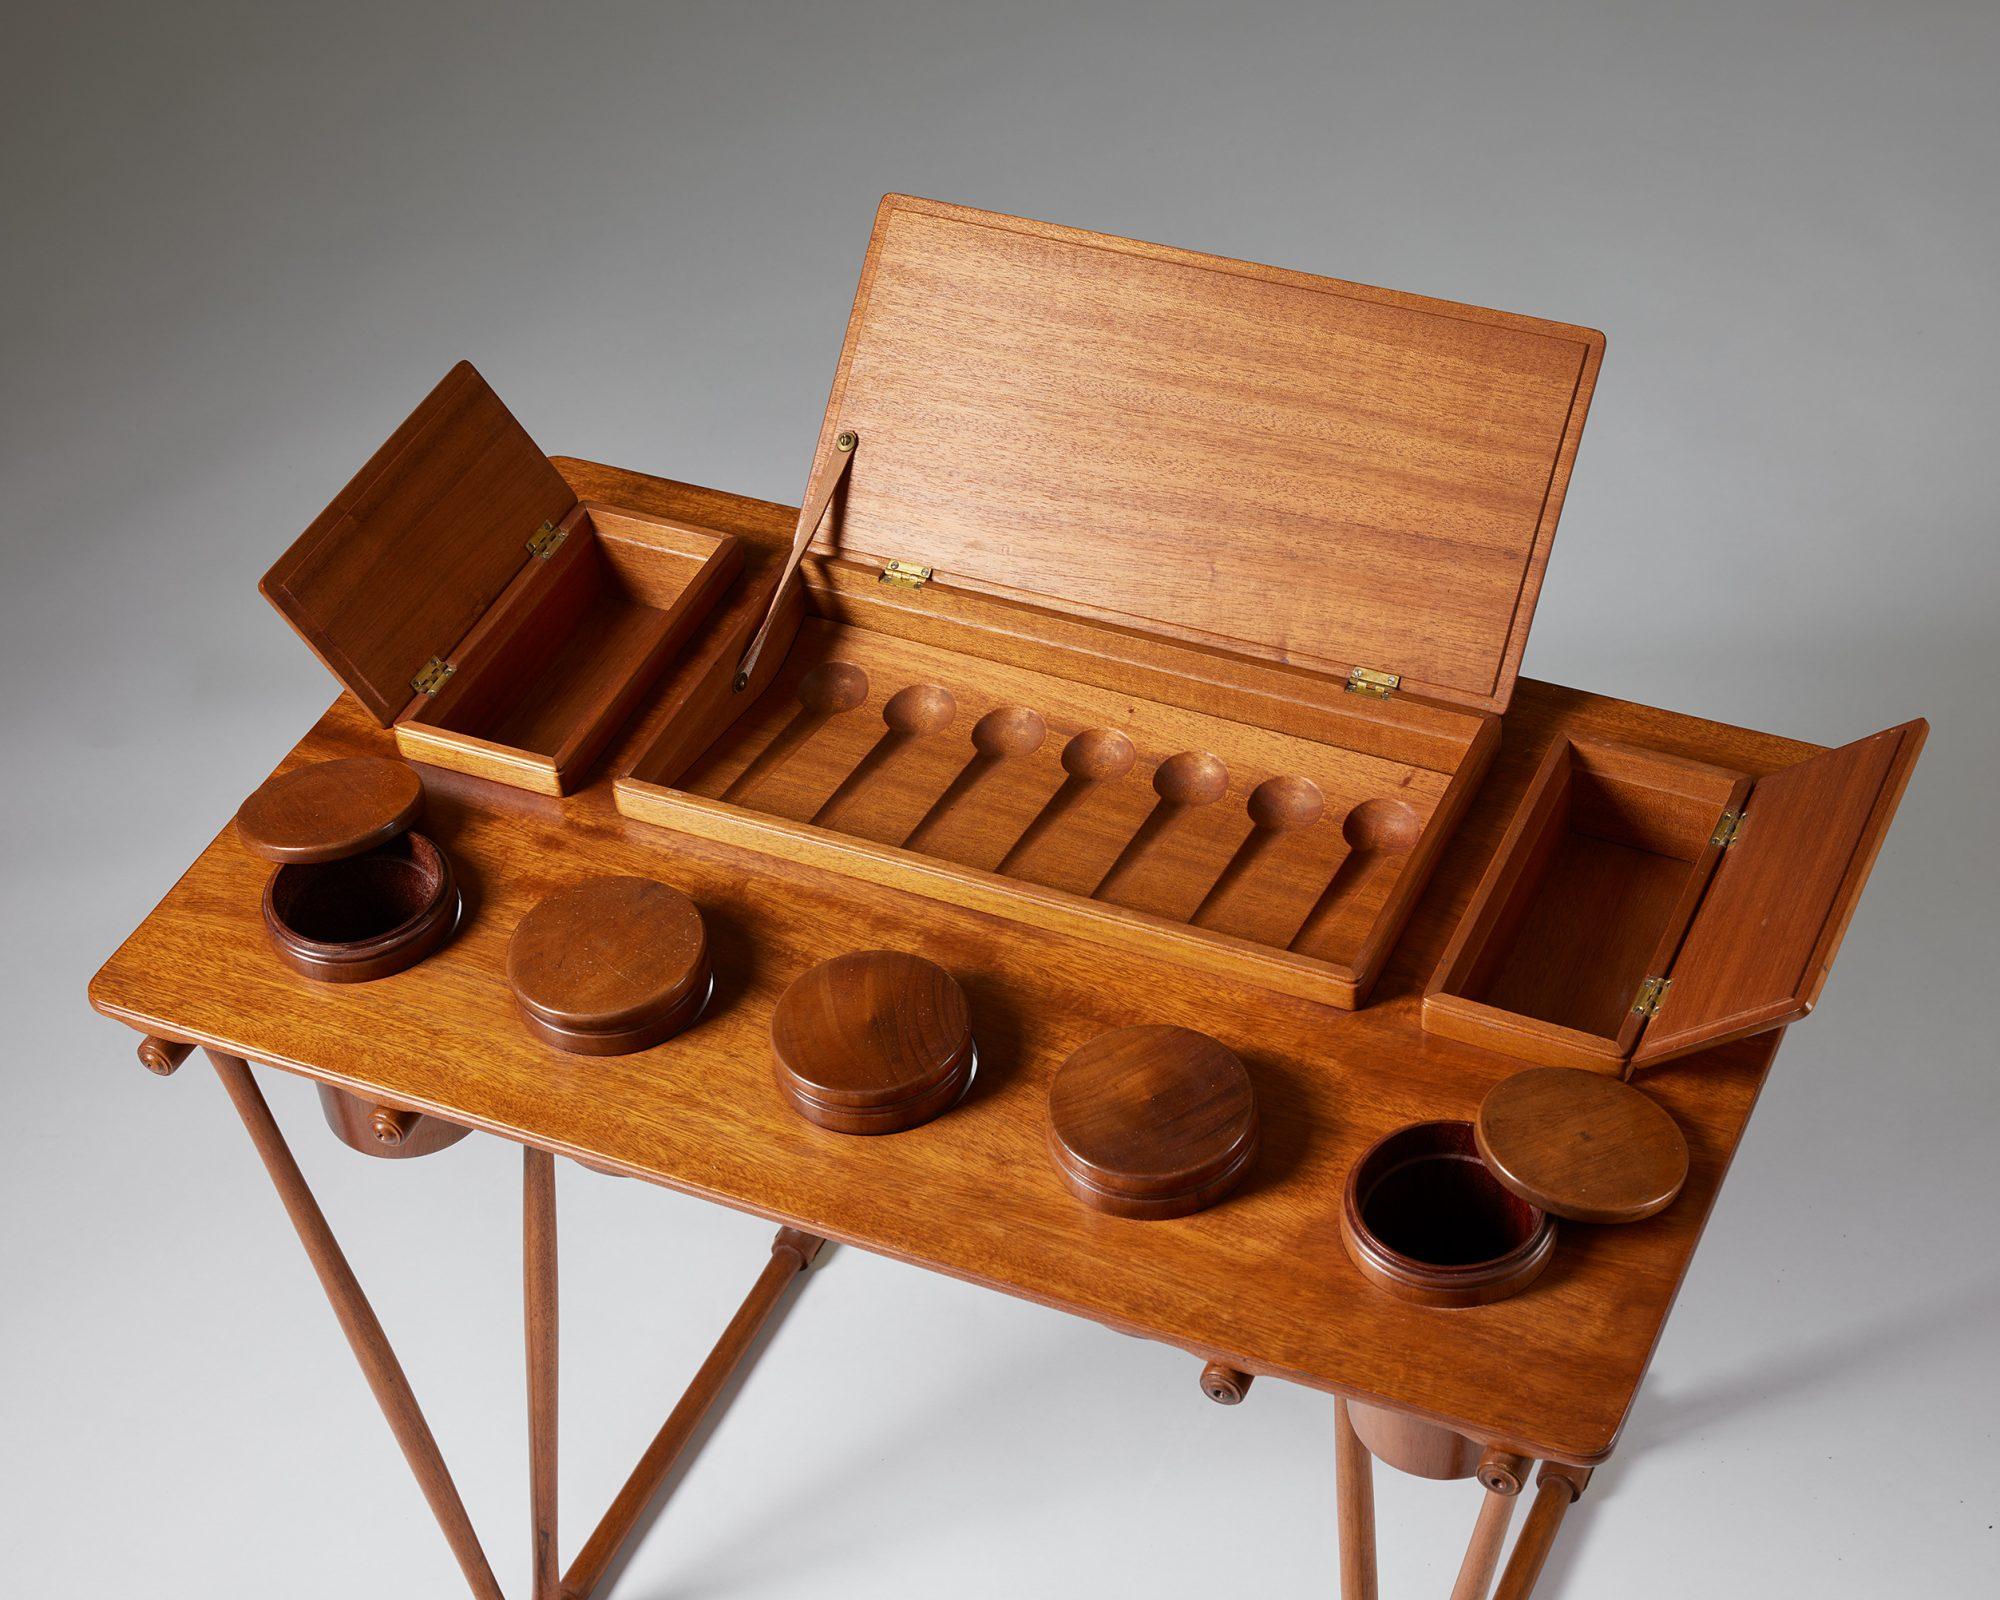 Table with compartments designed by Brockmann Petersen for Louis G Thiersen 1